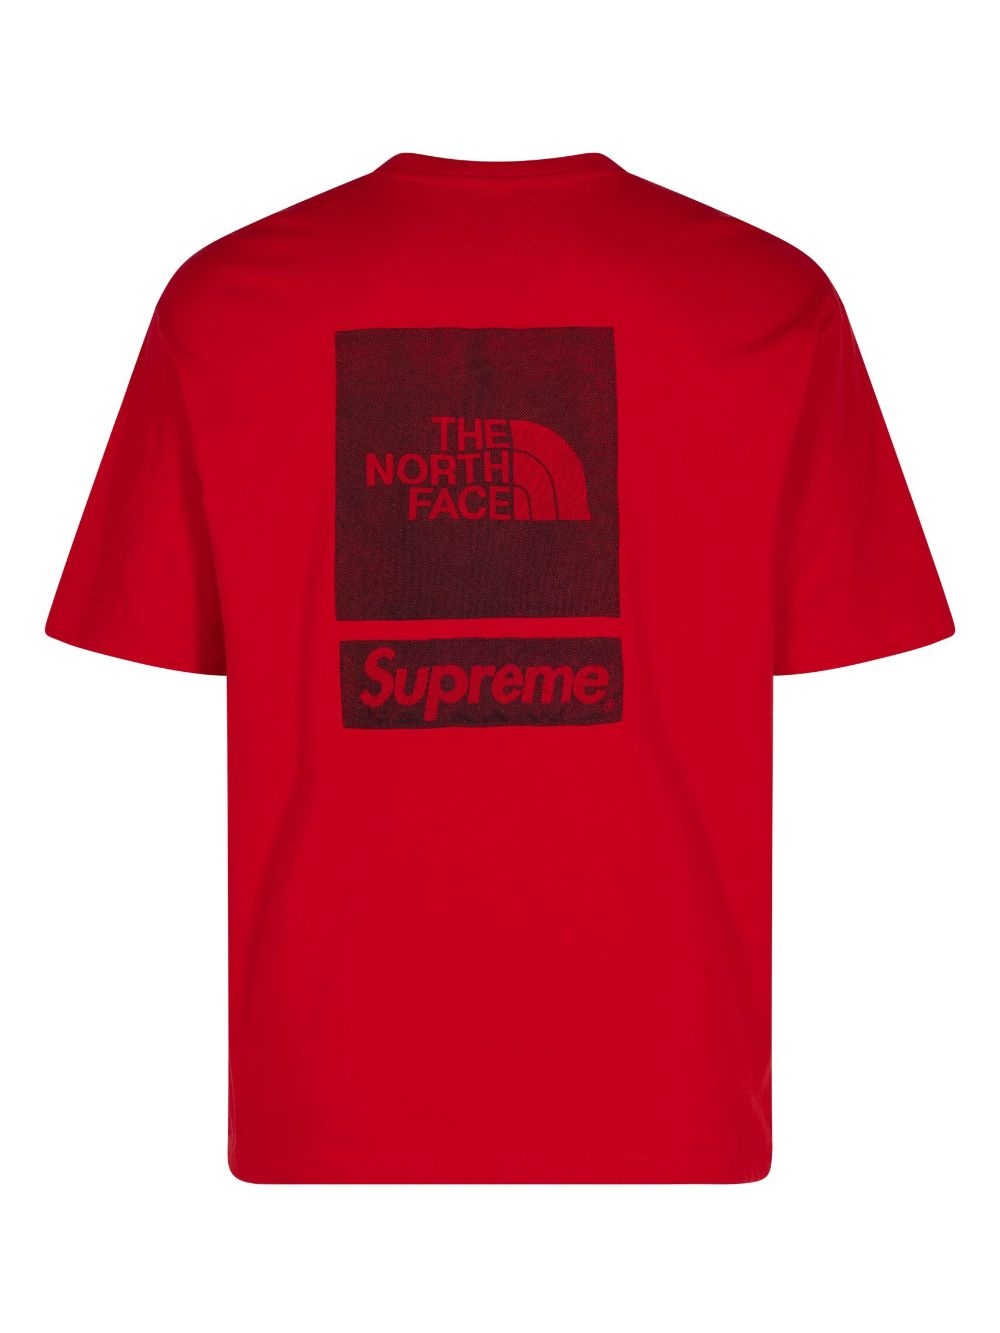 x The North Face "Red" T-shirt - 3